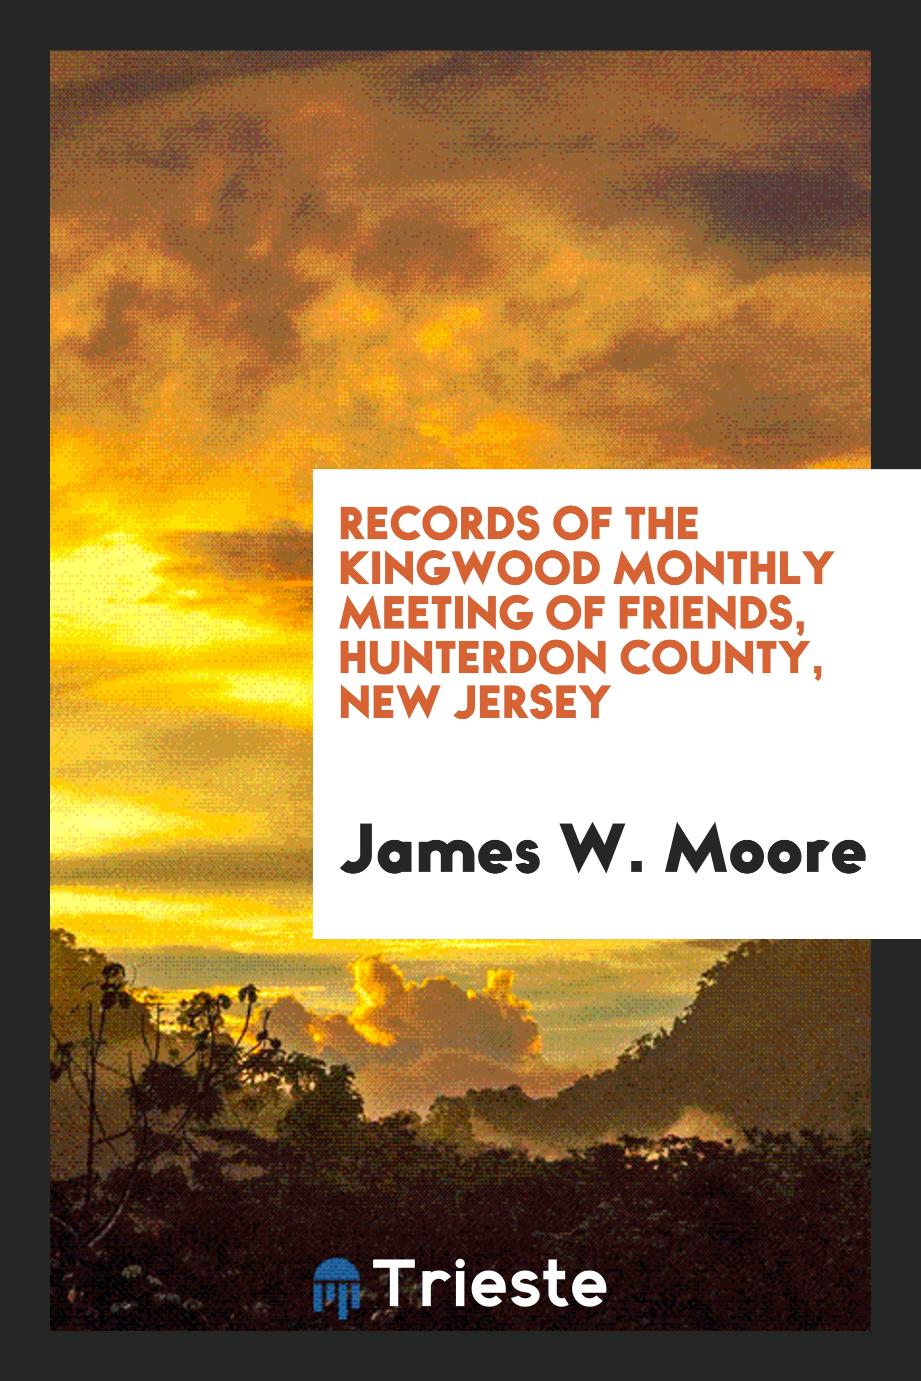 Records of the Kingwood Monthly Meeting of Friends, Hunterdon County, New Jersey